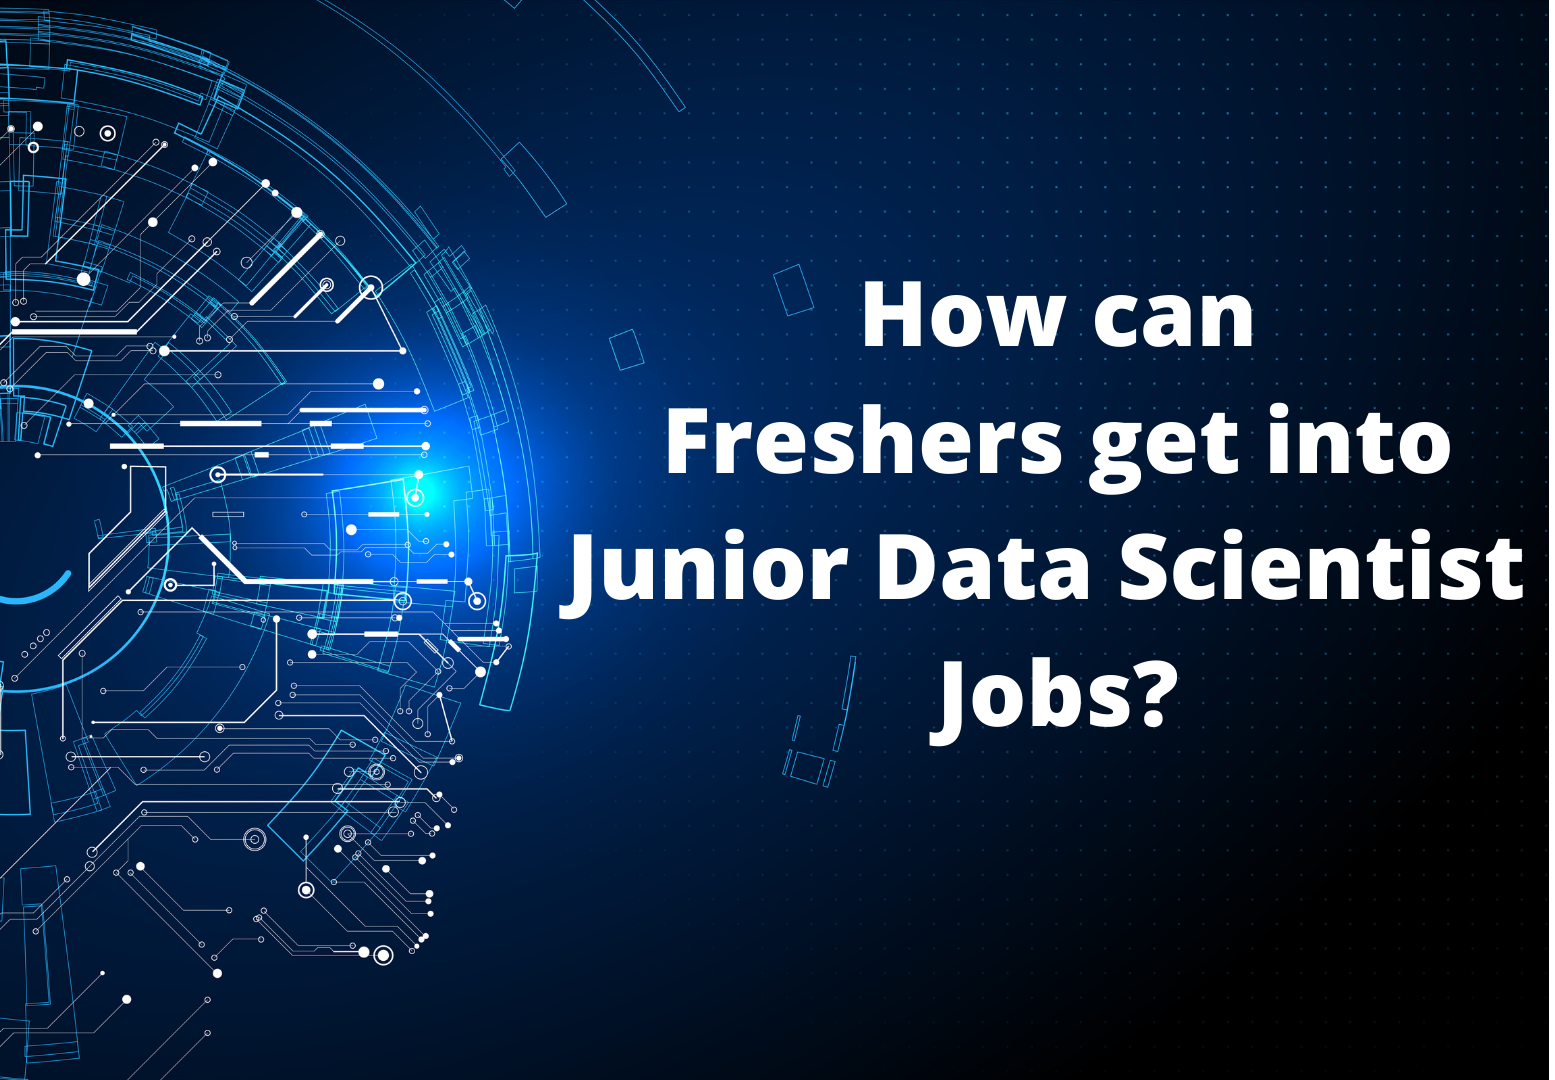 How can Freshers get into Junior Data Scientist Jobs?